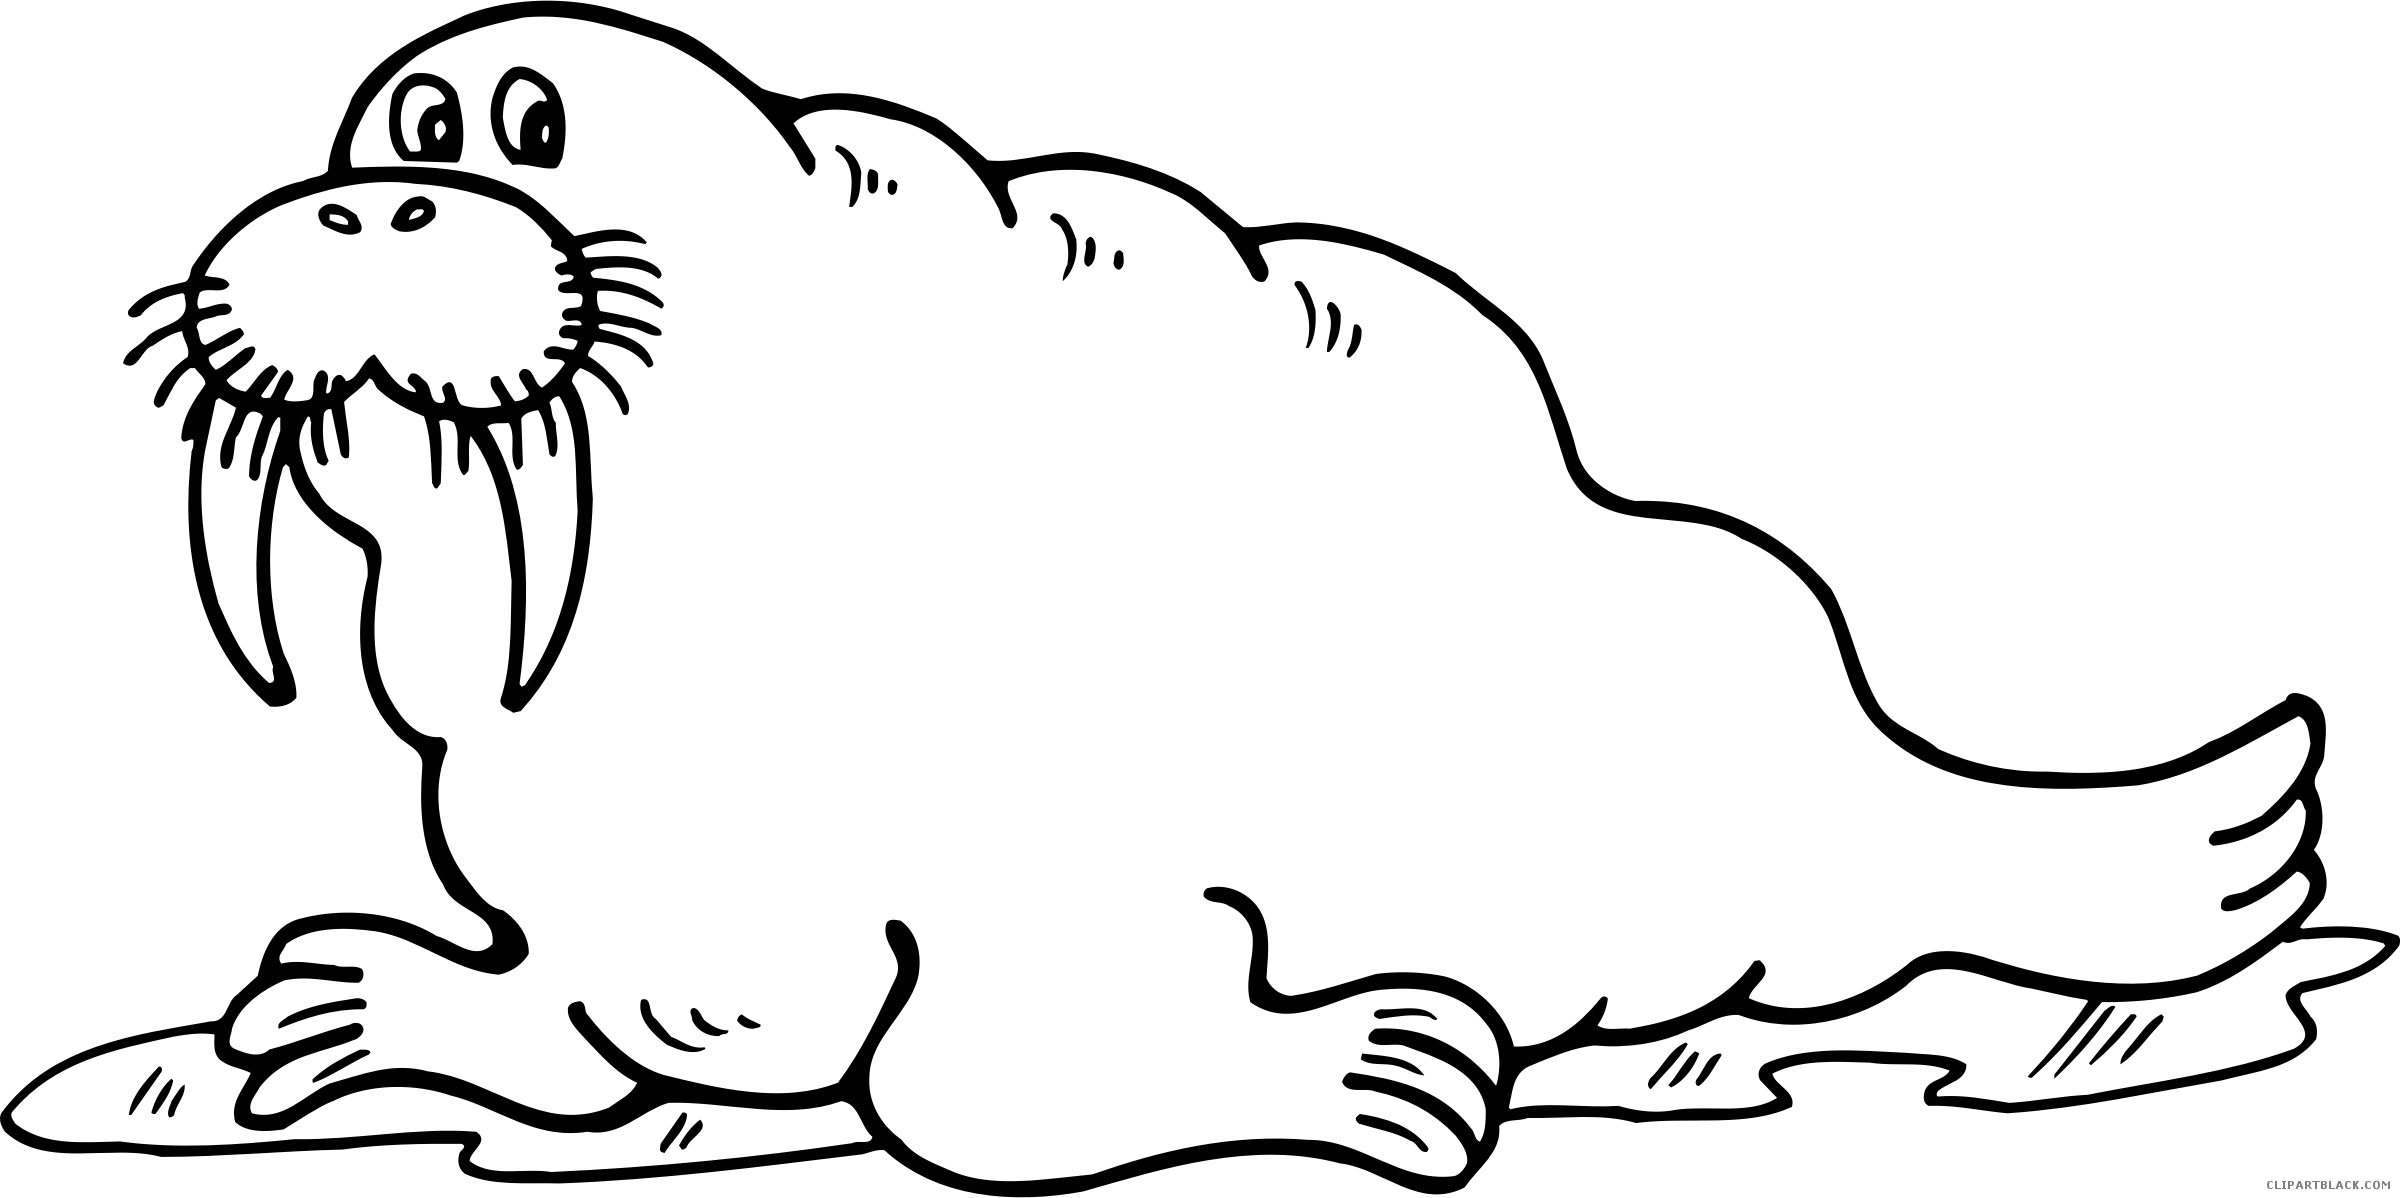 Page of clipartblack com. Walrus clipart black and white